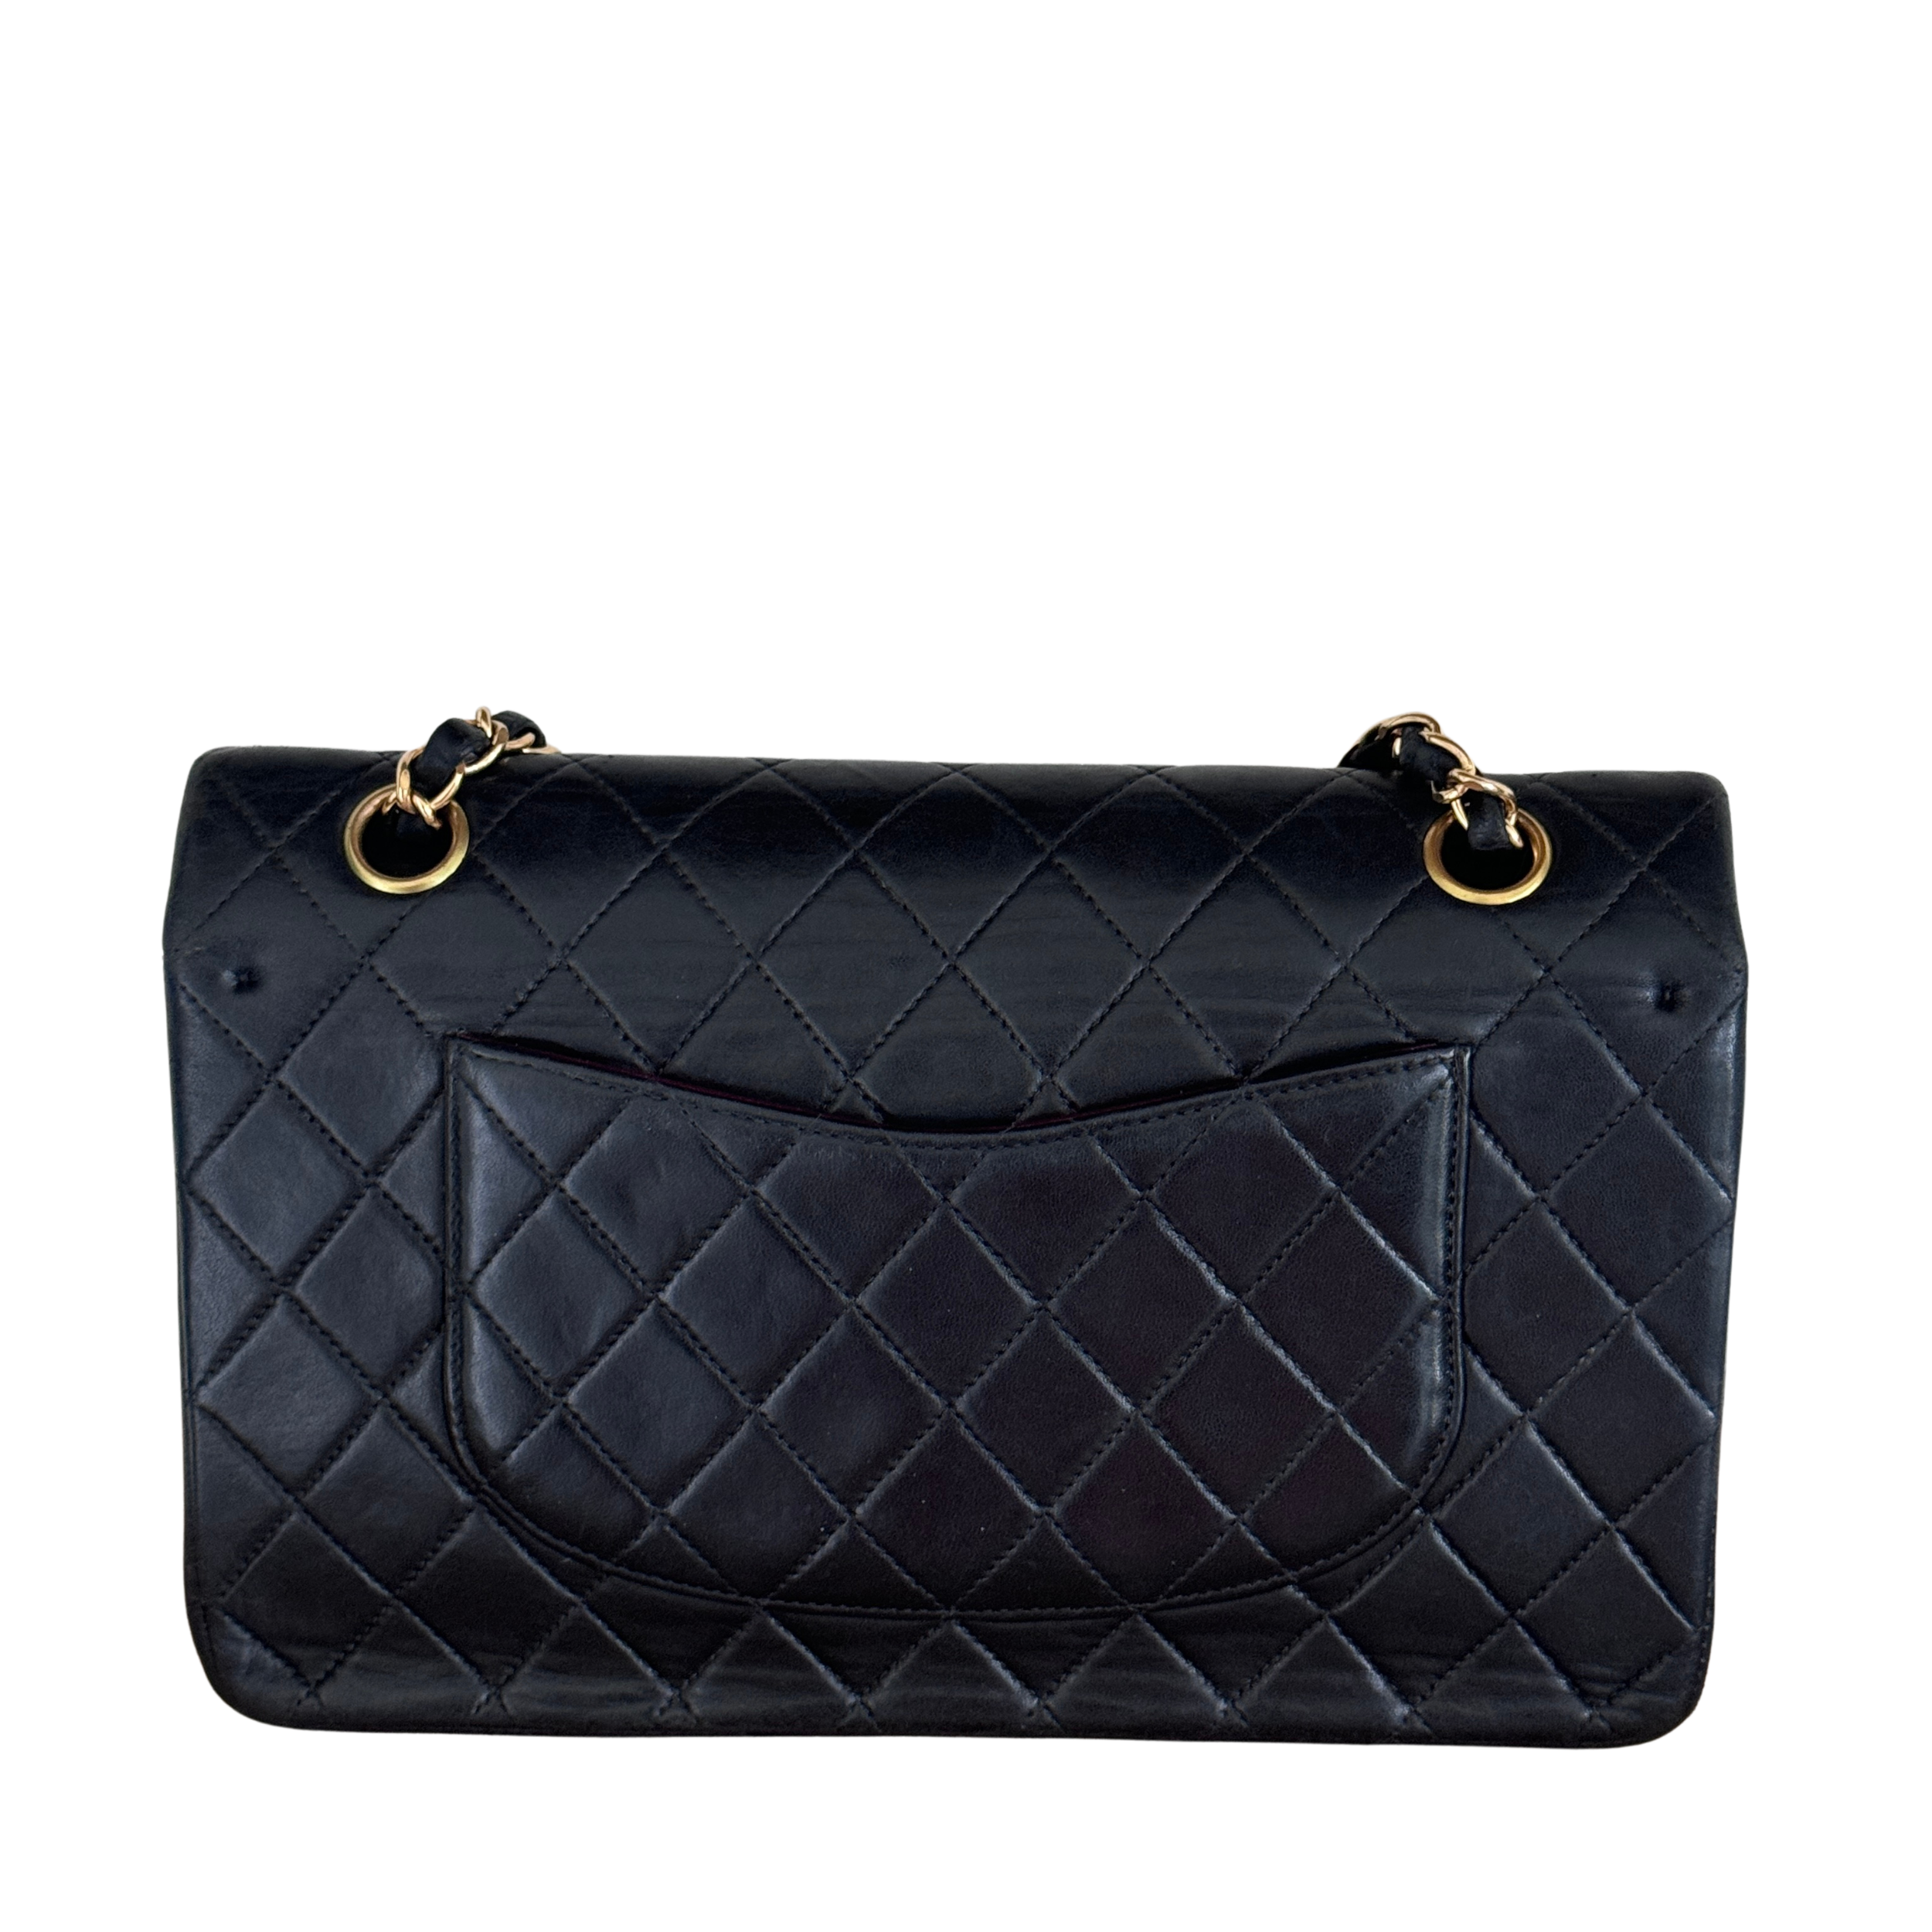 CLASSIC TIMELESS MEDIUM DOUBLE FLAP - CHANEL Lola Collective